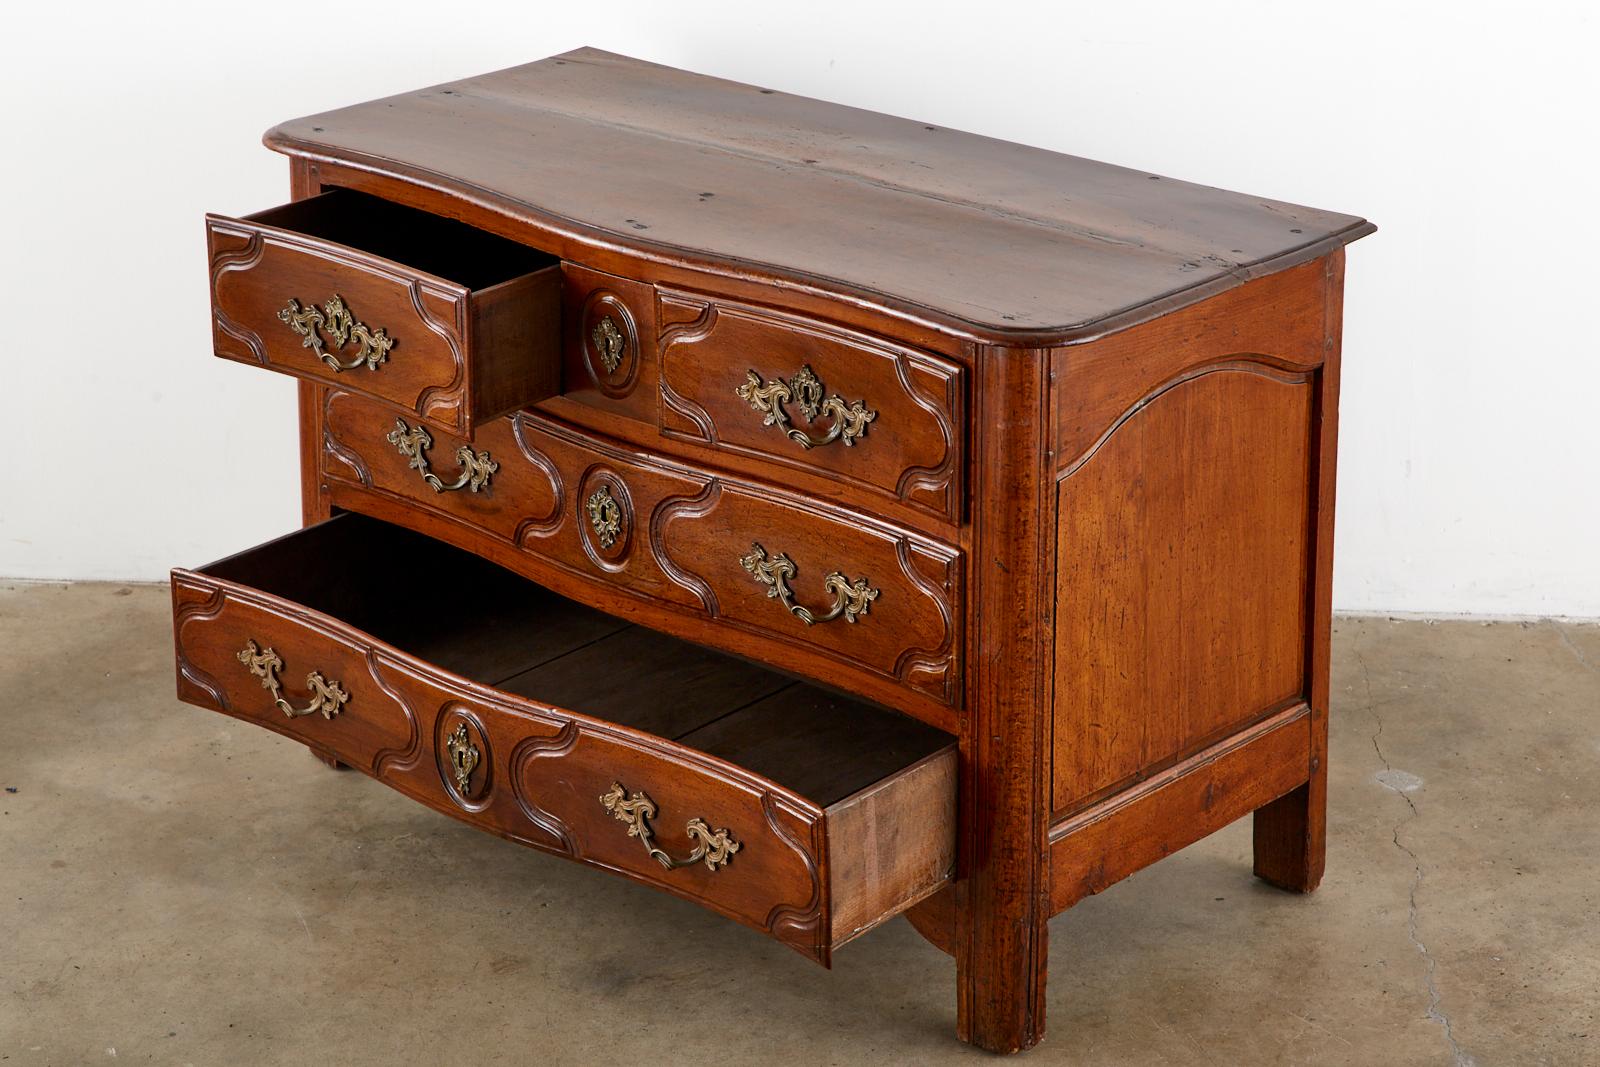 Hand-Crafted 18th Century French Regence Walnut Commode or Chest